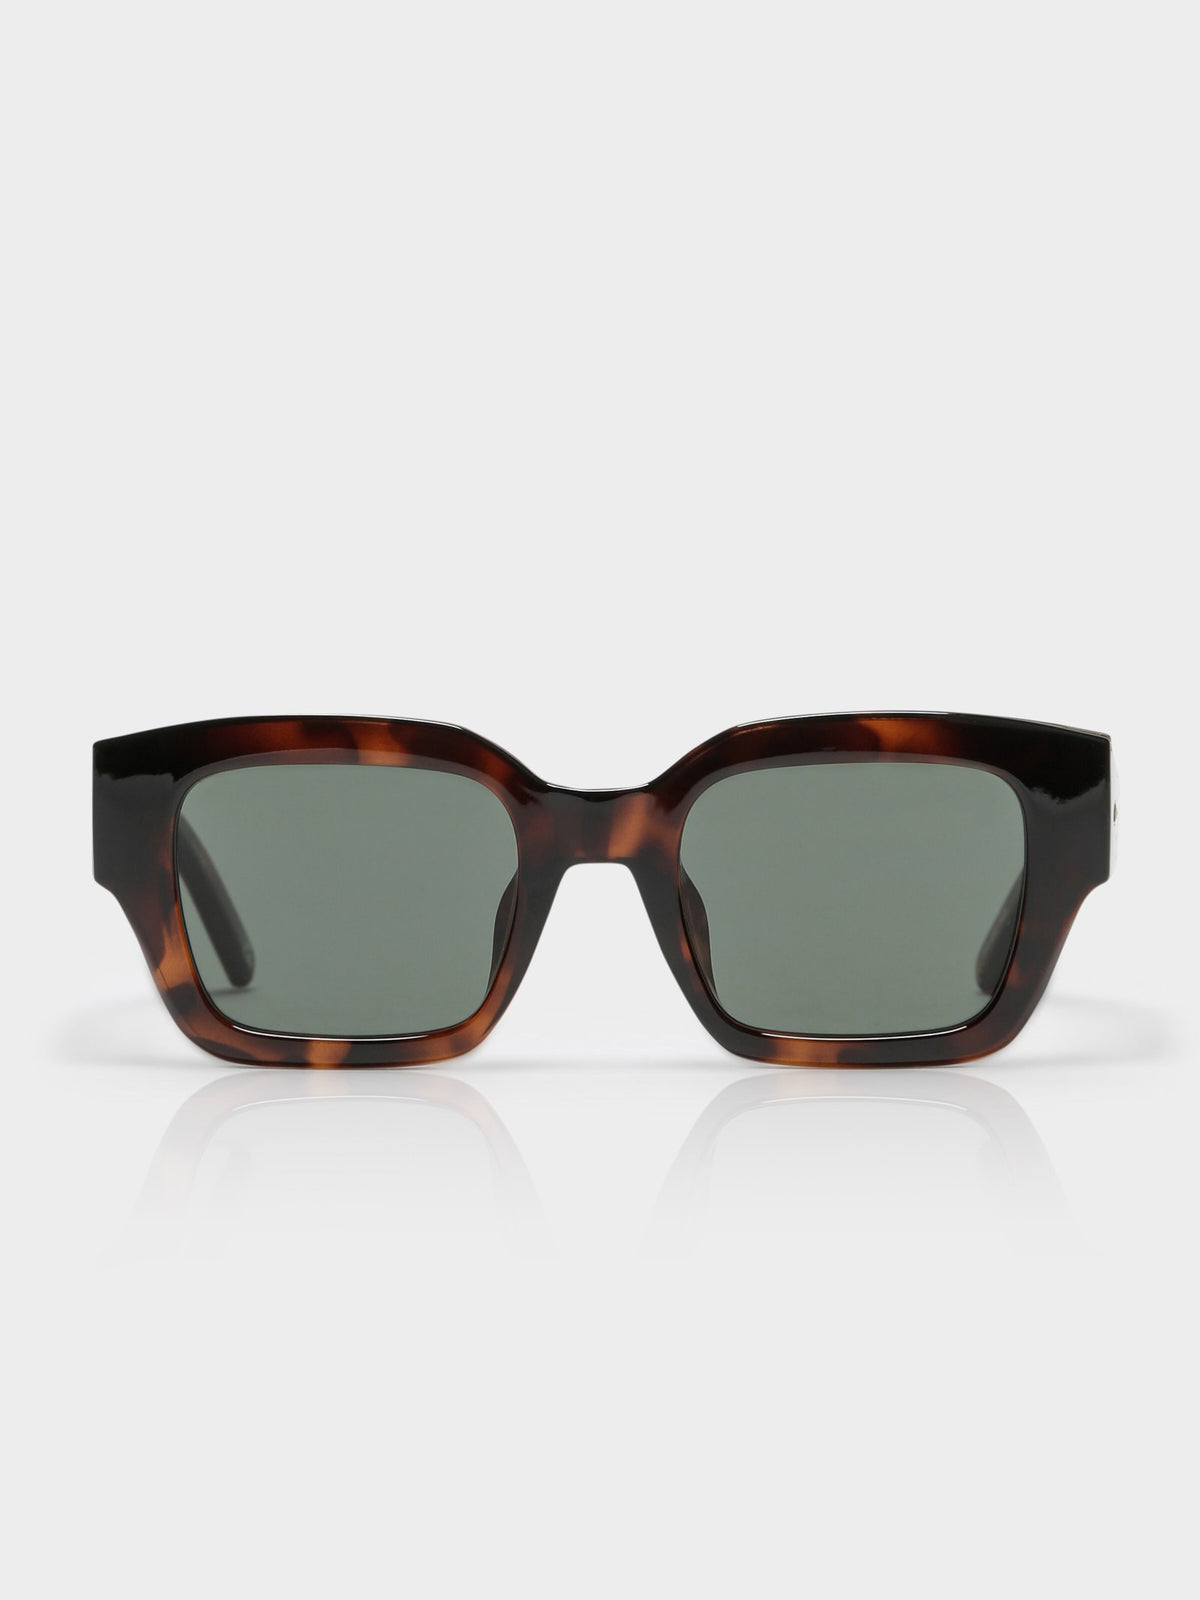 Hypnos Alt Fit Sunglasses in Tort